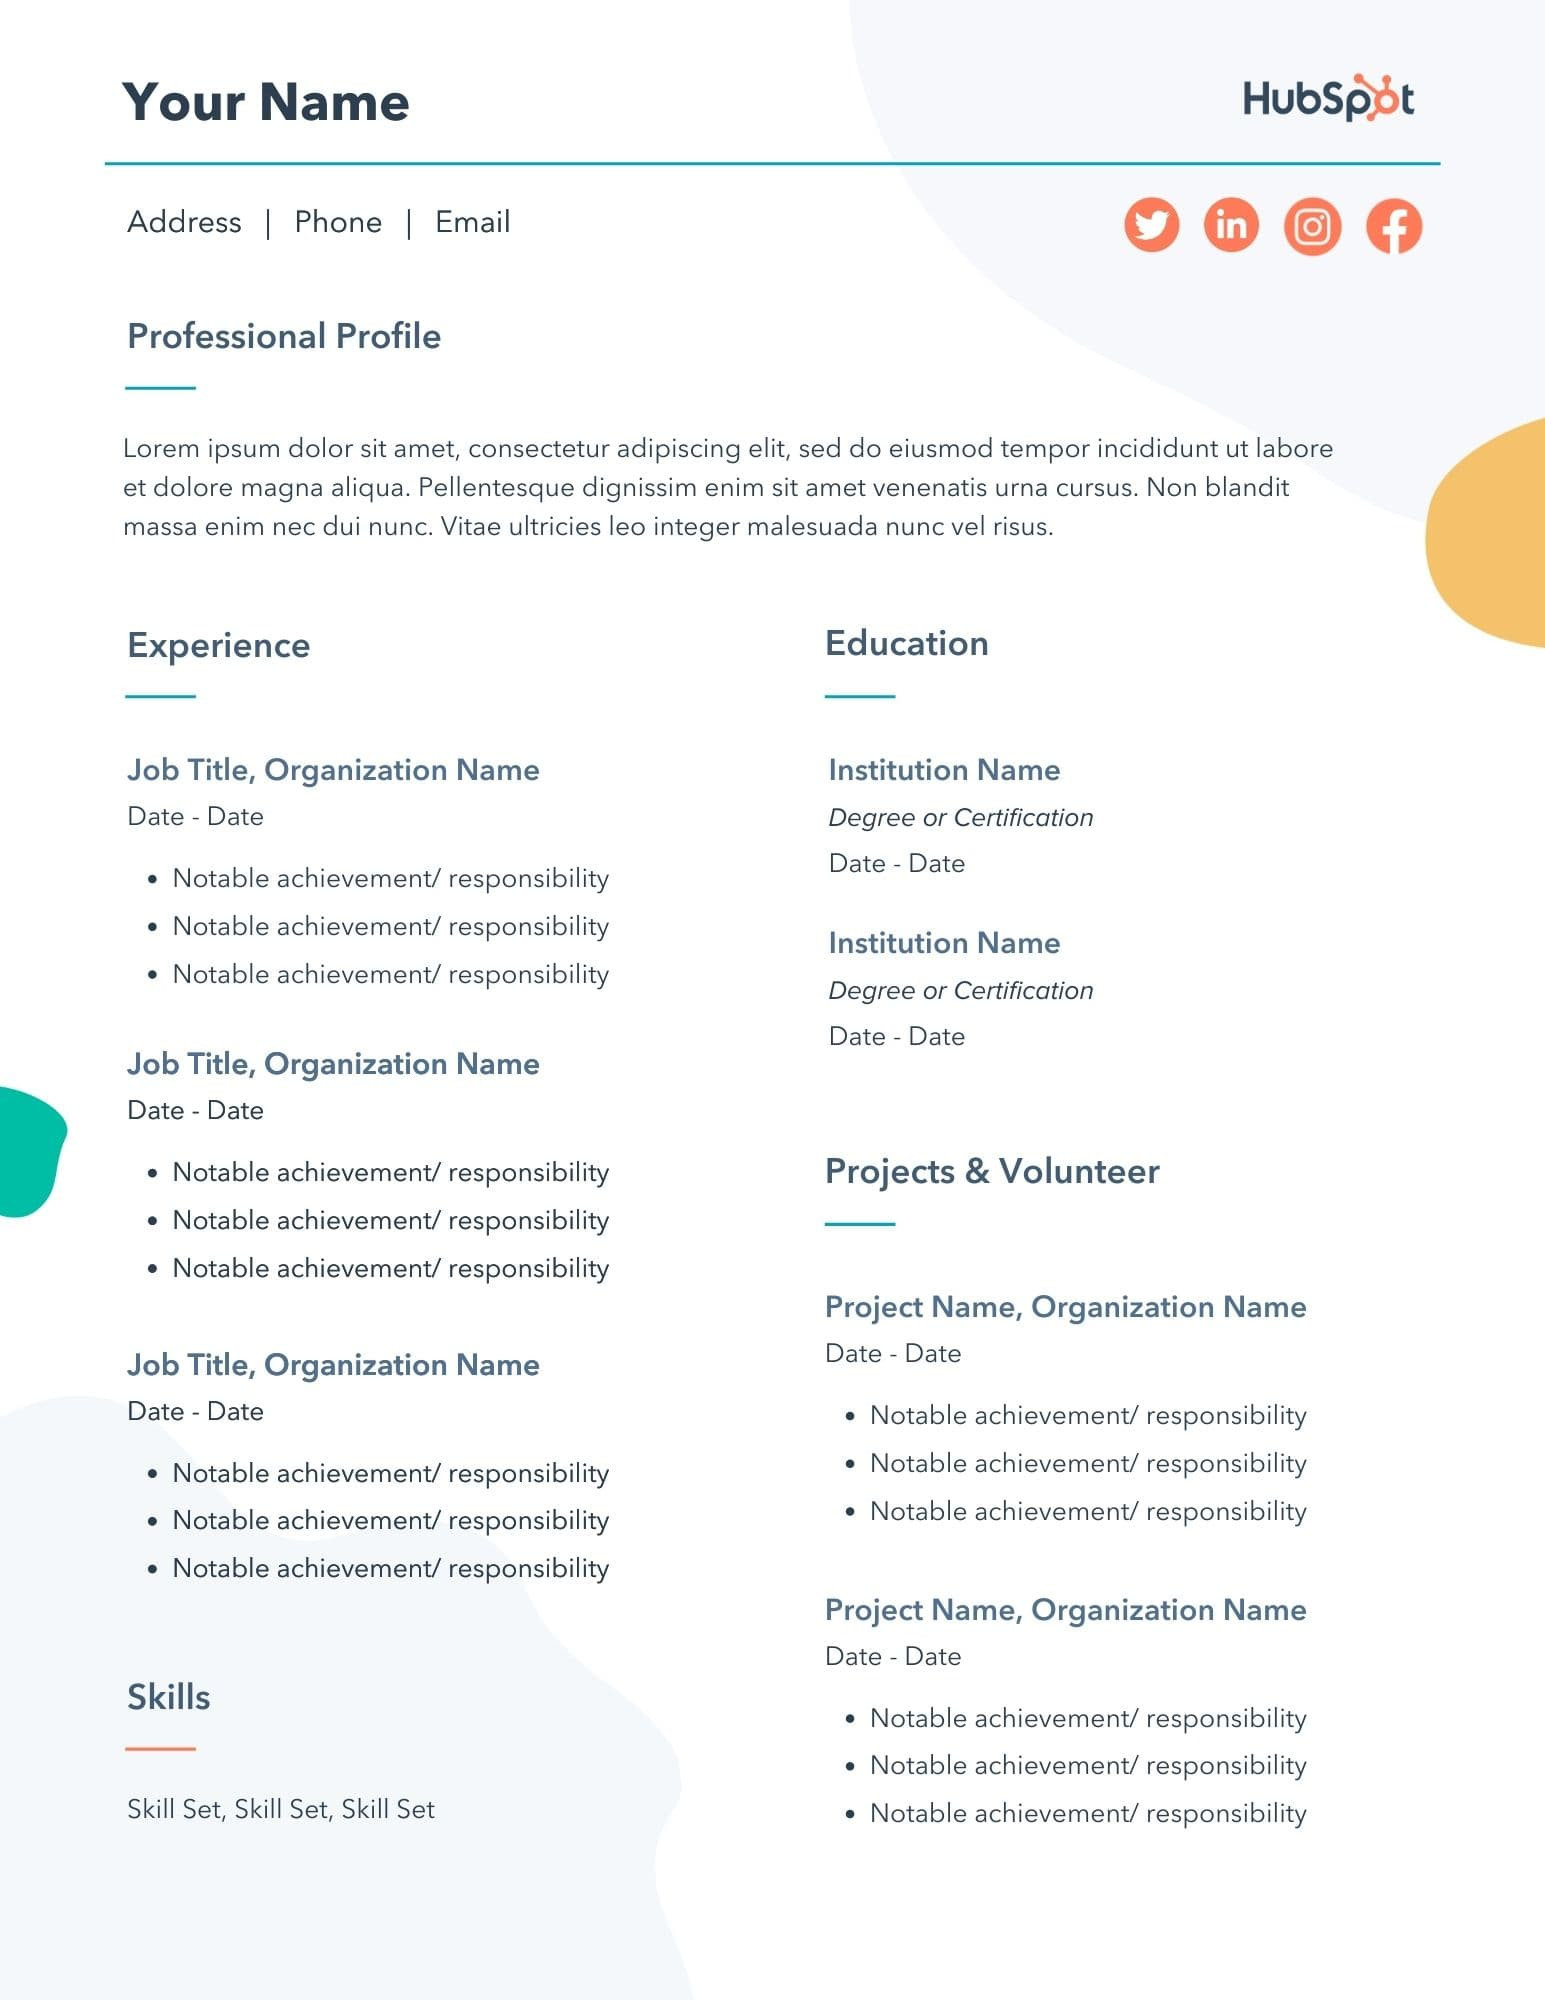 Best Resume Template to Get Hired 29 Free Resume Templates for Microsoft Word (& How to Make Your Own)